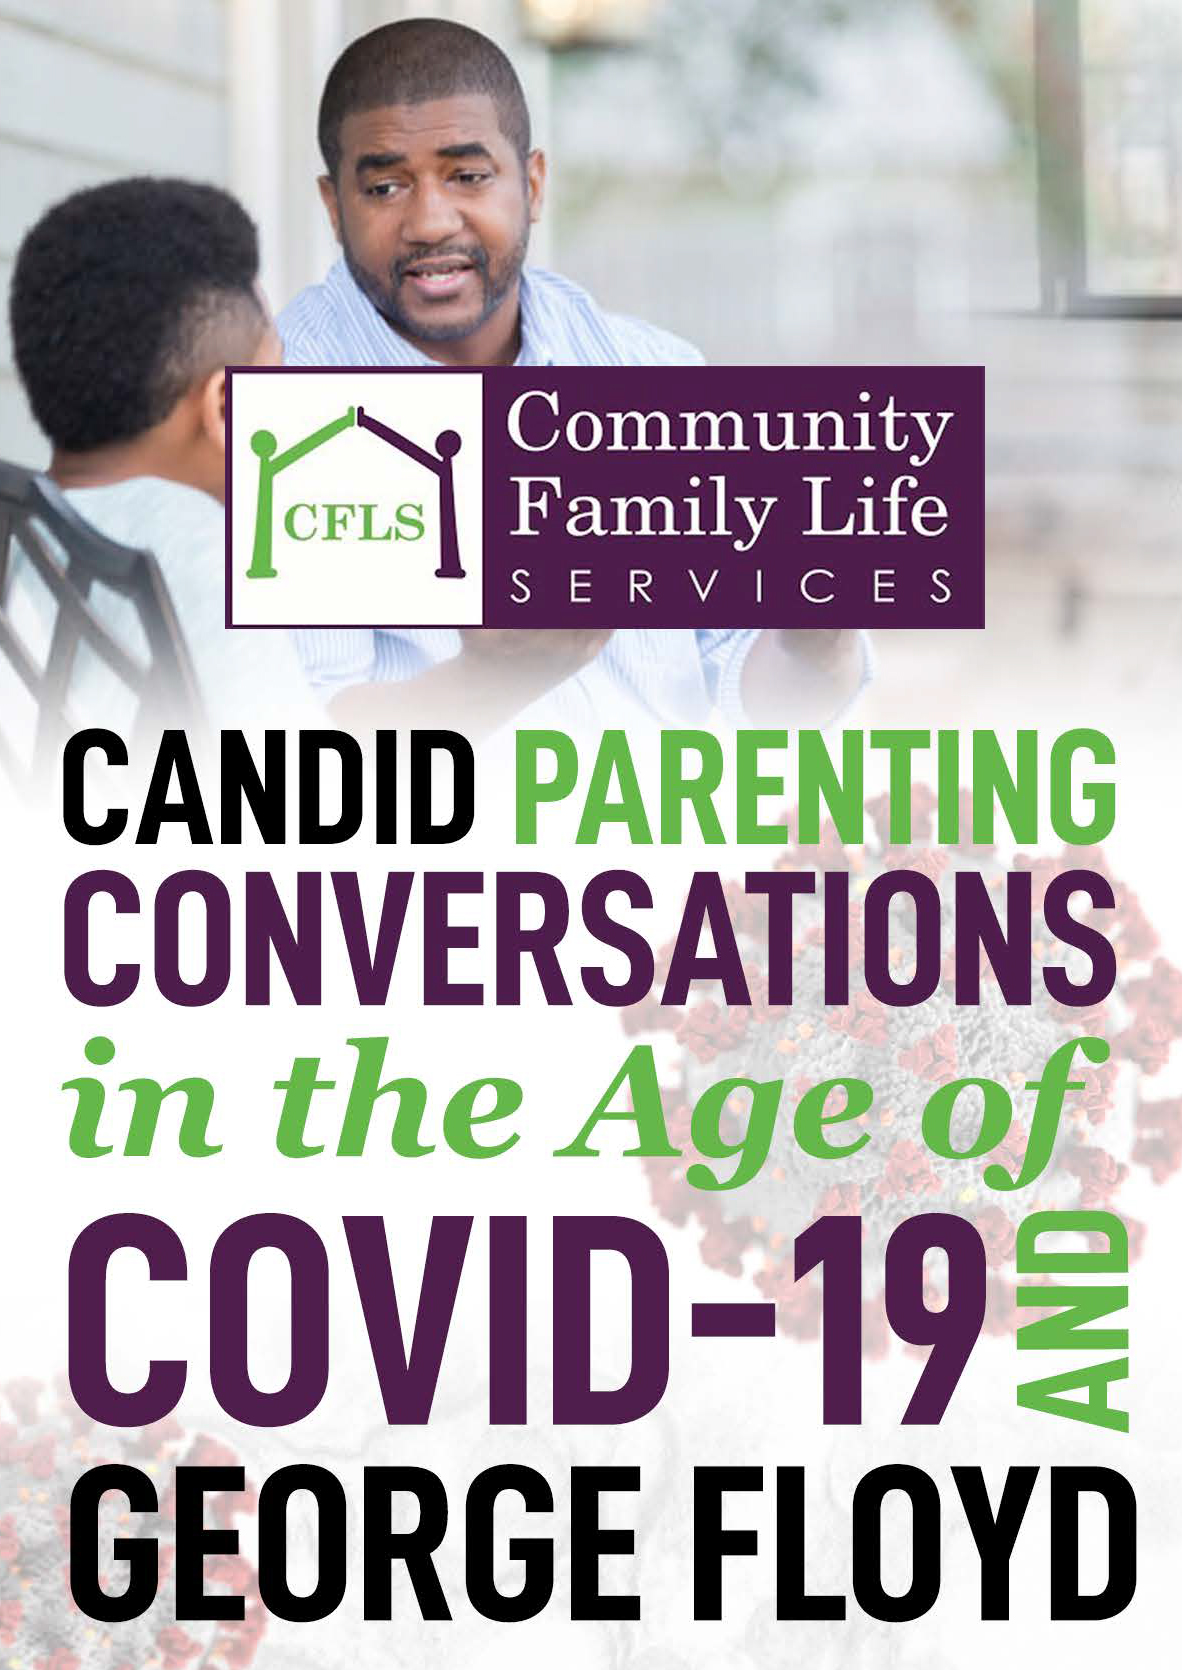 Candid Parenting Conversations in the Age of COVID-19 and George Floyd